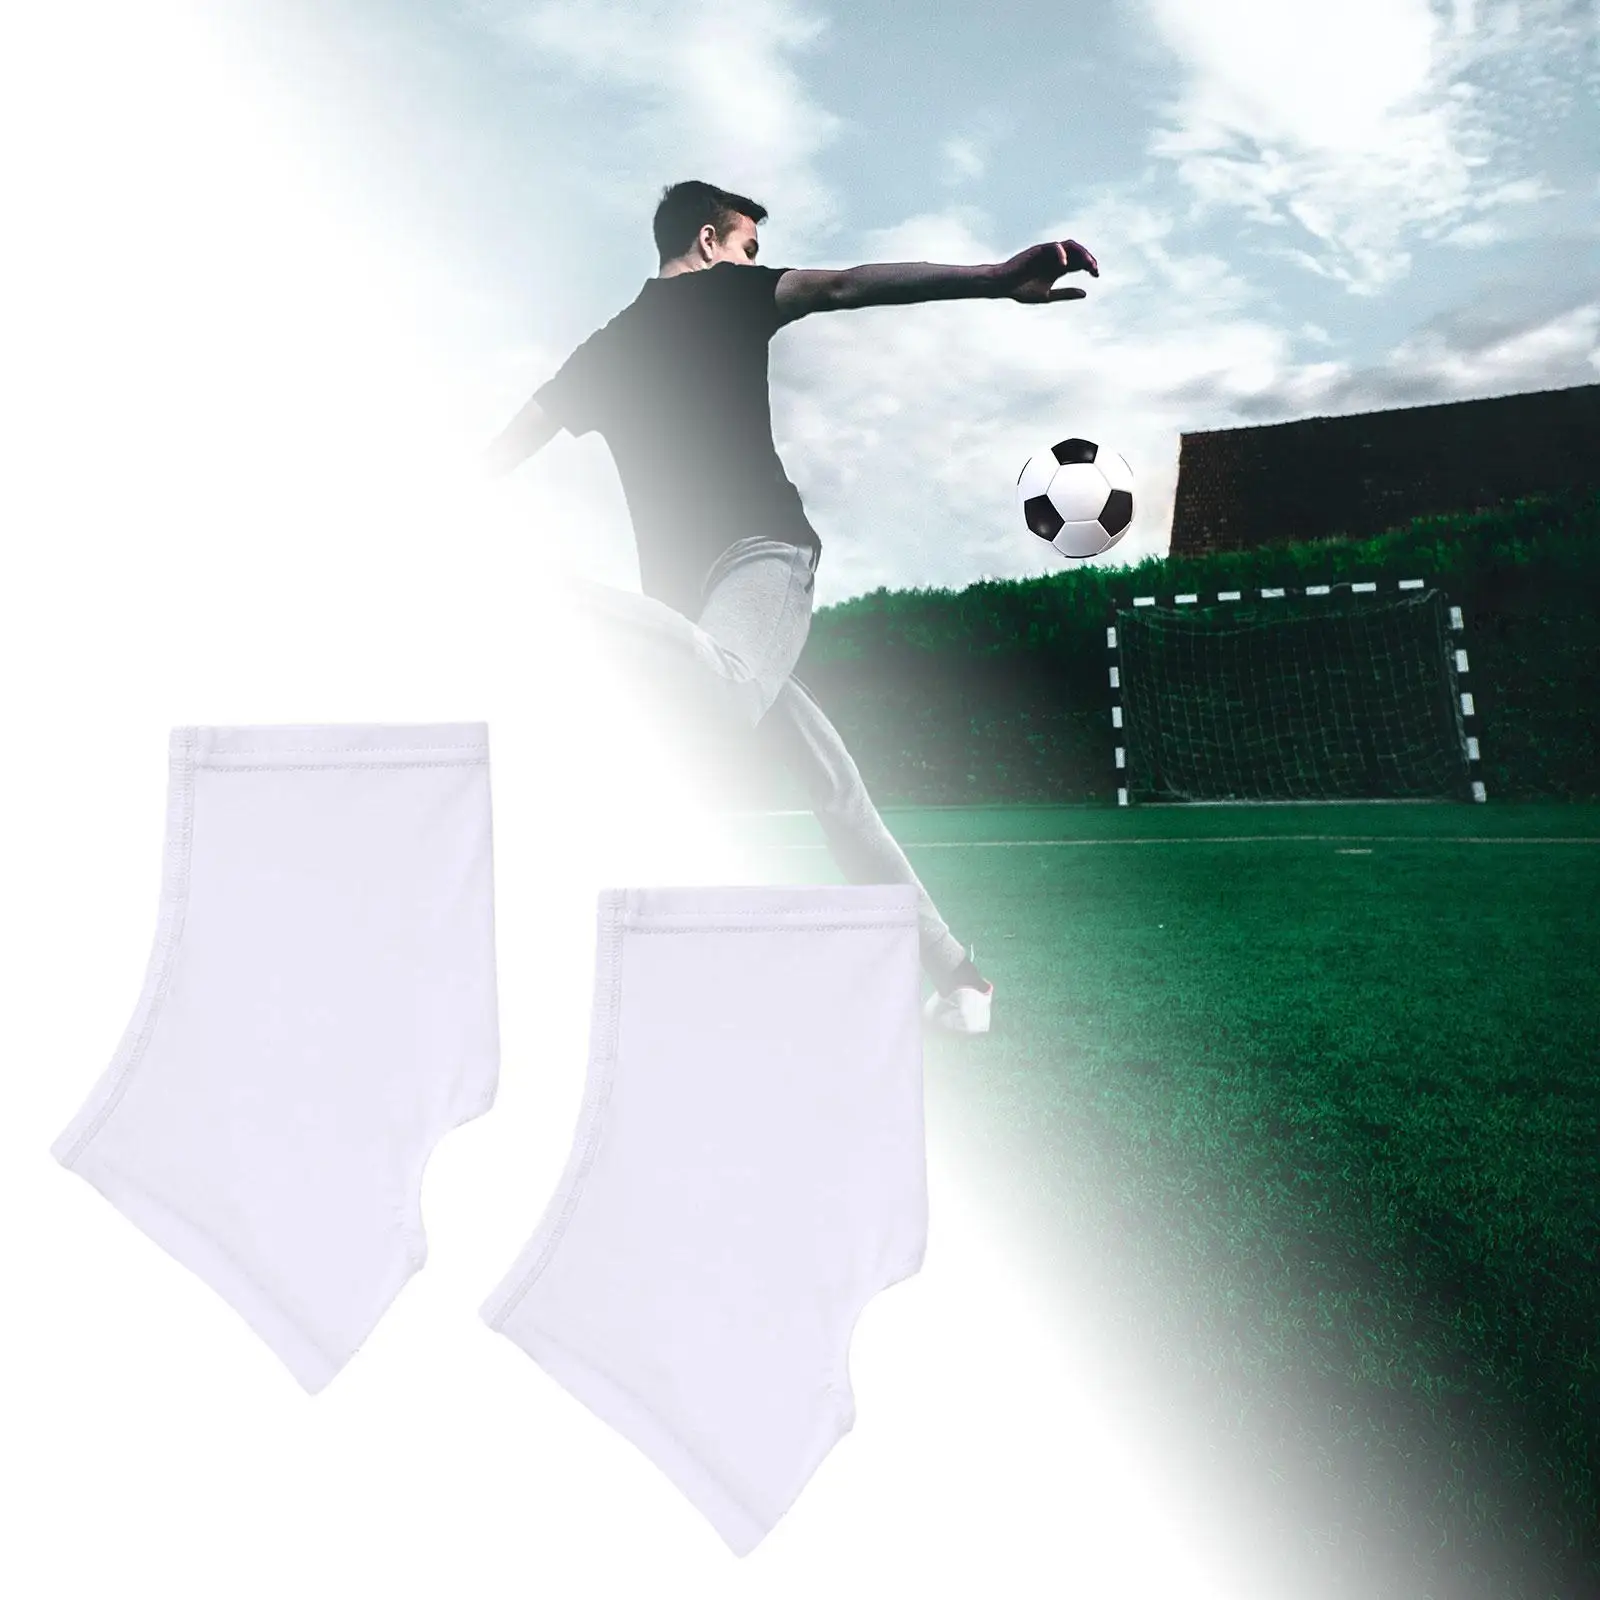 2x Spats Cleat Socks Lacrosse Baseball 1 Pair Elastic Boys and Girls Soccer Teenagers Baseball Sports Spats Cleat Sleeves